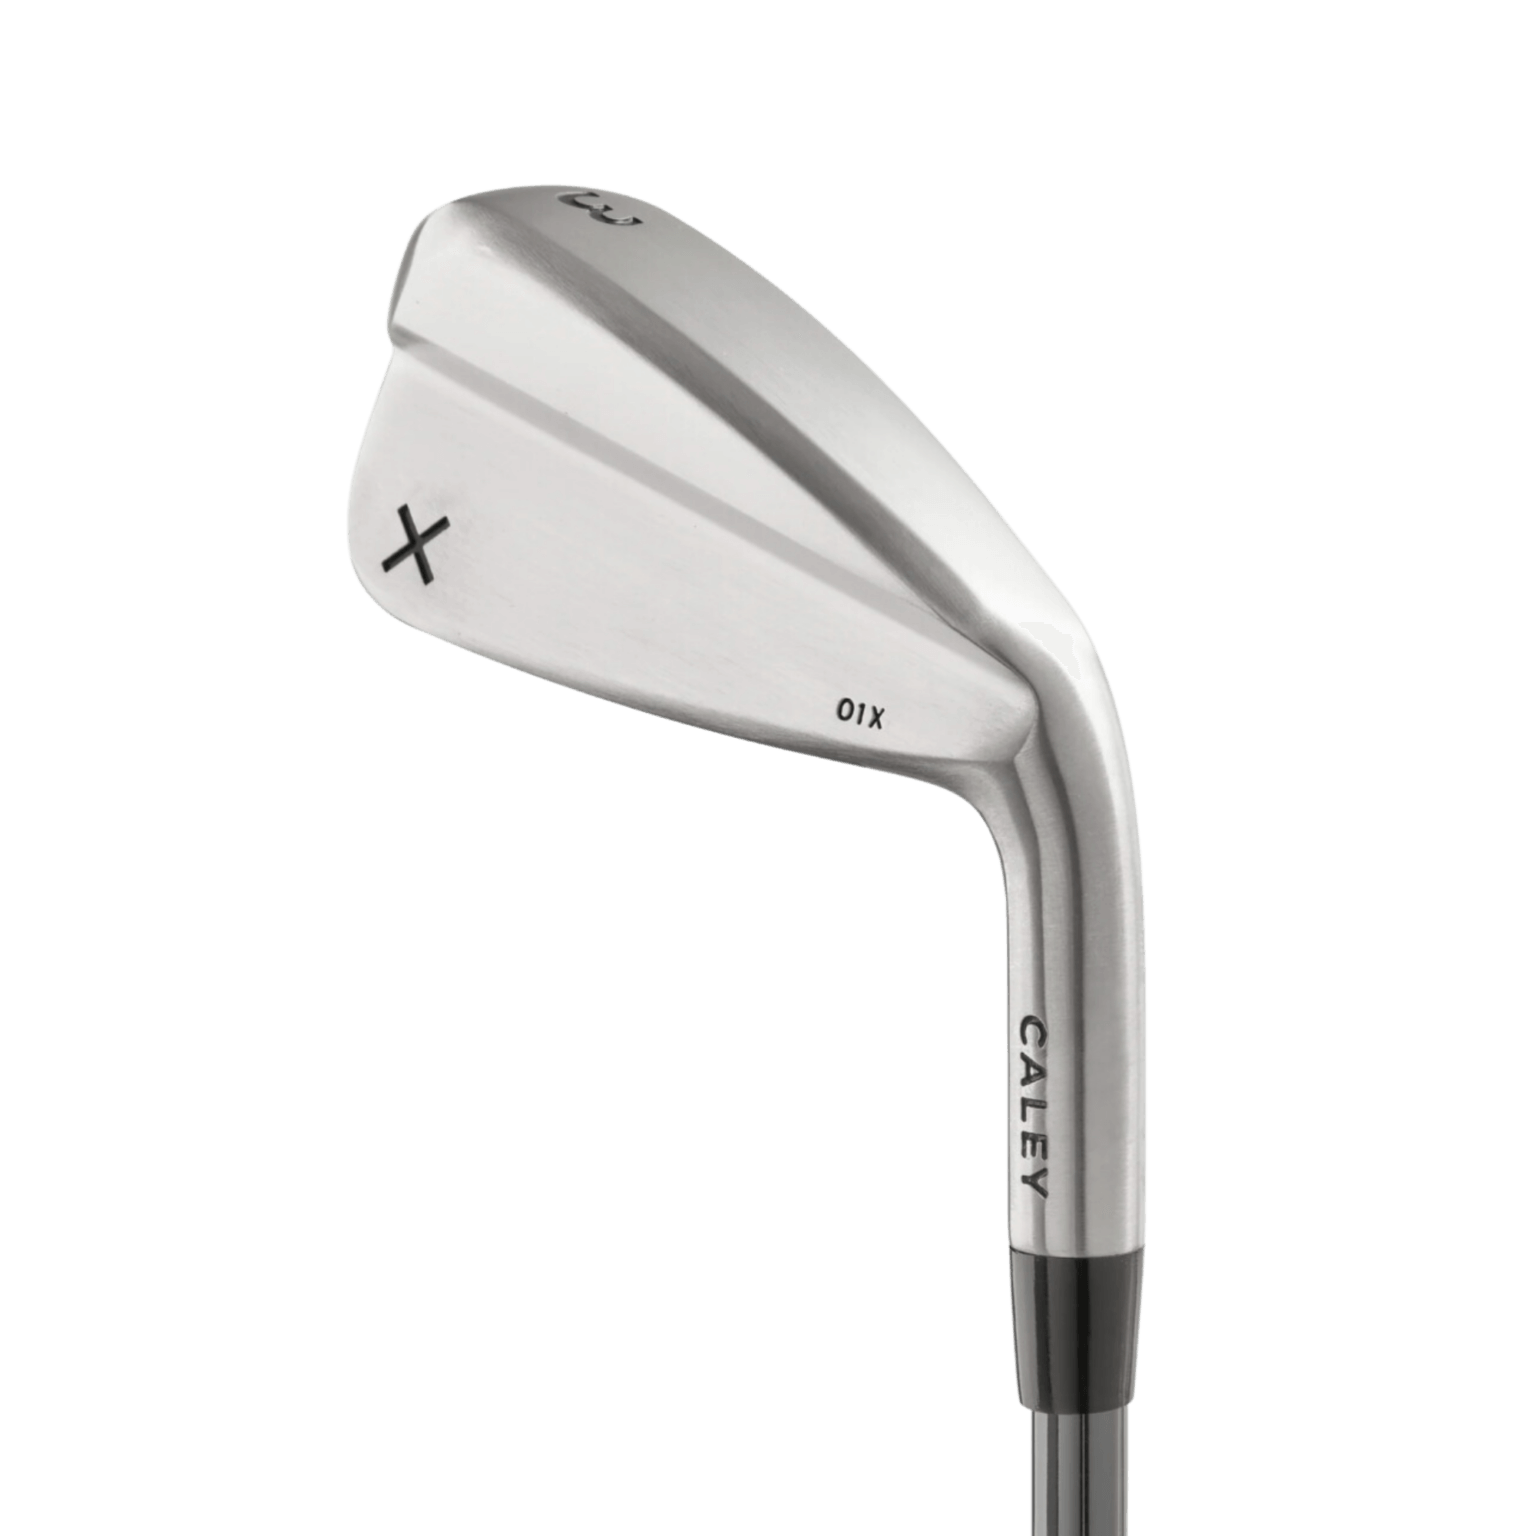 Caley Golf 01X Utility Iron s Review